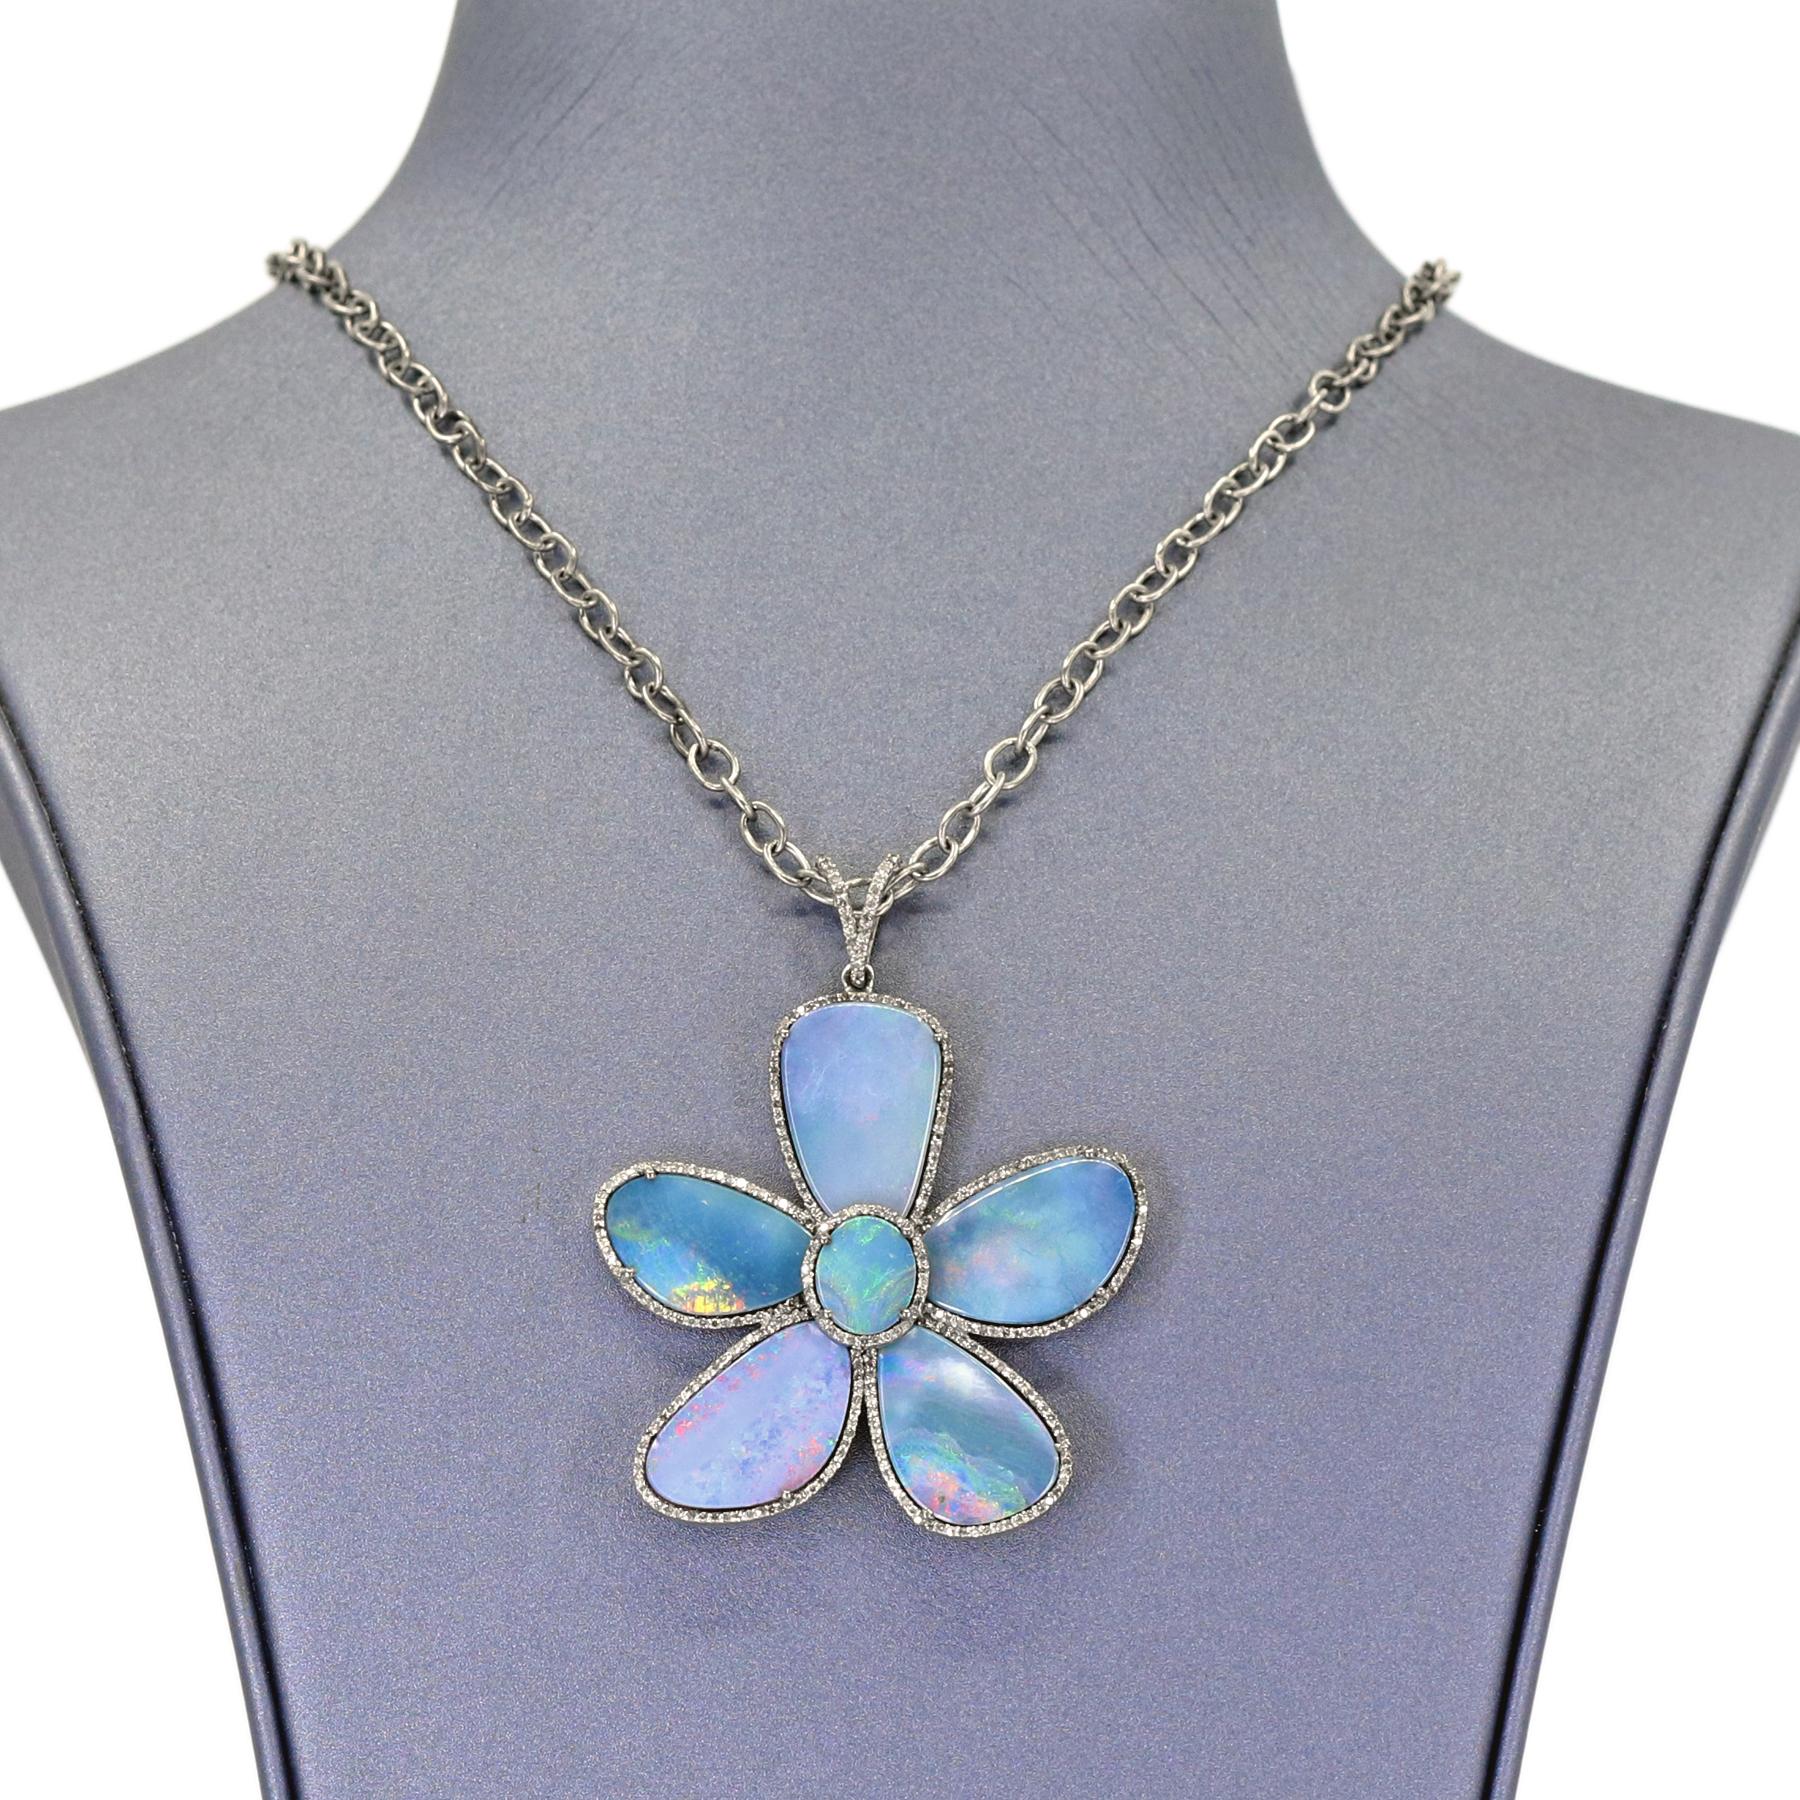 One of a Kind Flower Pendant in rhodium sterling silver by jewelry designer Lori Barros showcasing six fiery, matched blue Australian opal doublets prong set and bordered with pave' diamonds beneath a pave diamond double bail. Multiple chain options